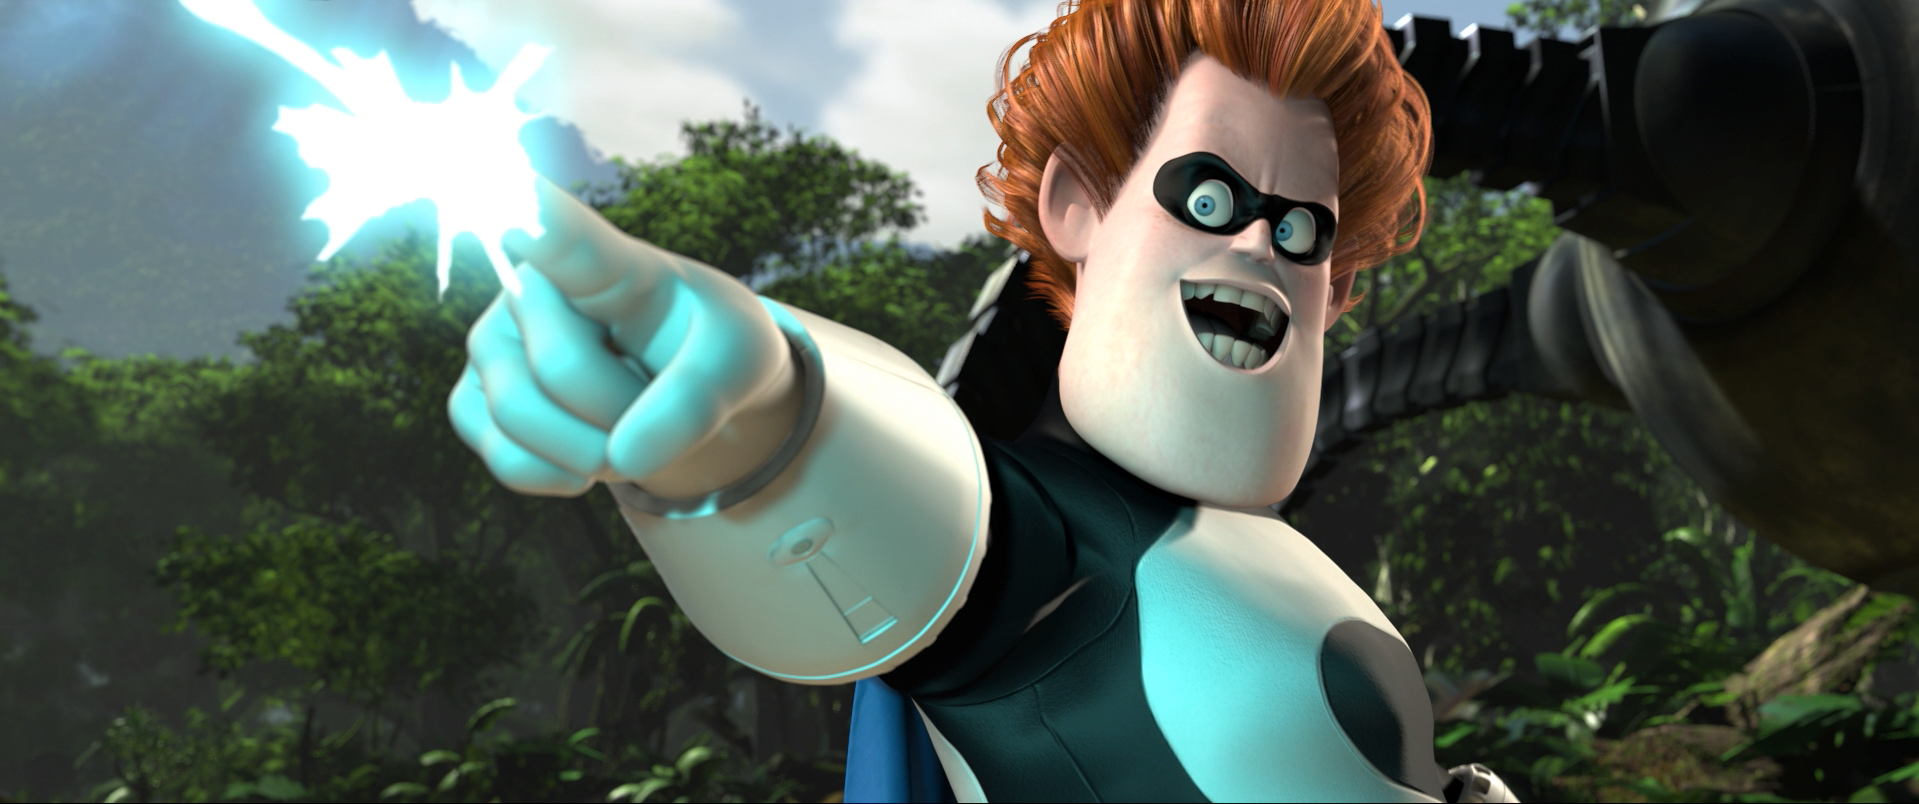 Syndrome from Pixar's The Incredibles